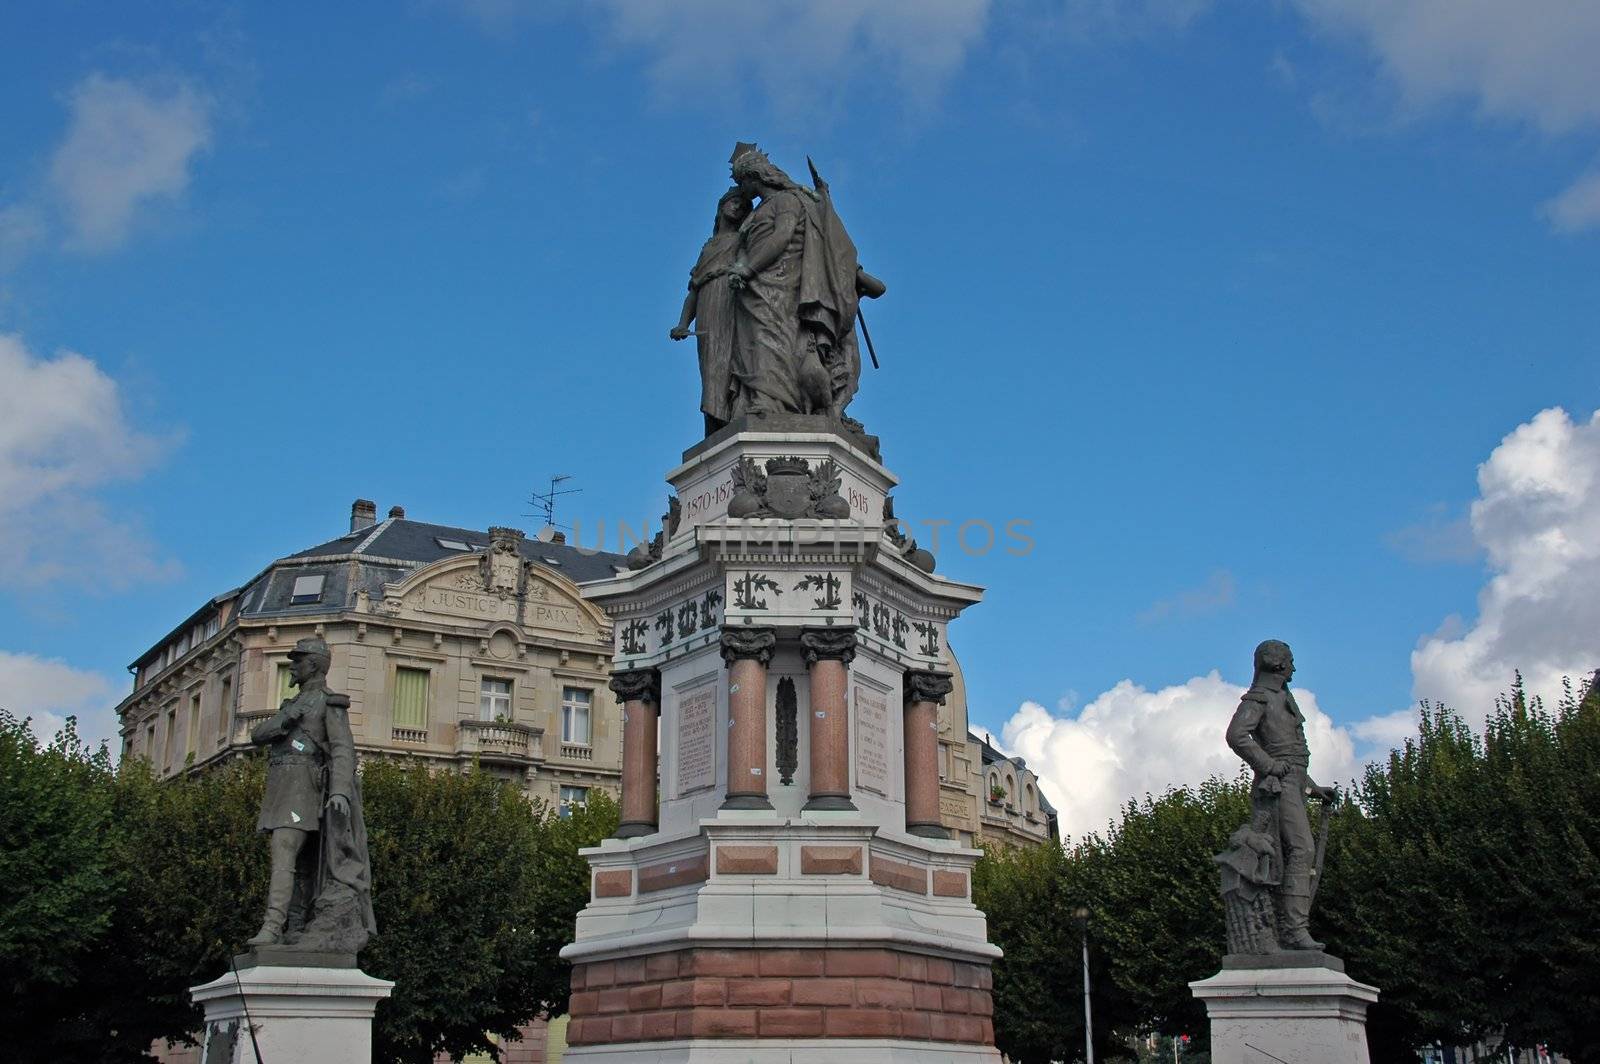 justice monument and statues in nelfort, france by raalves